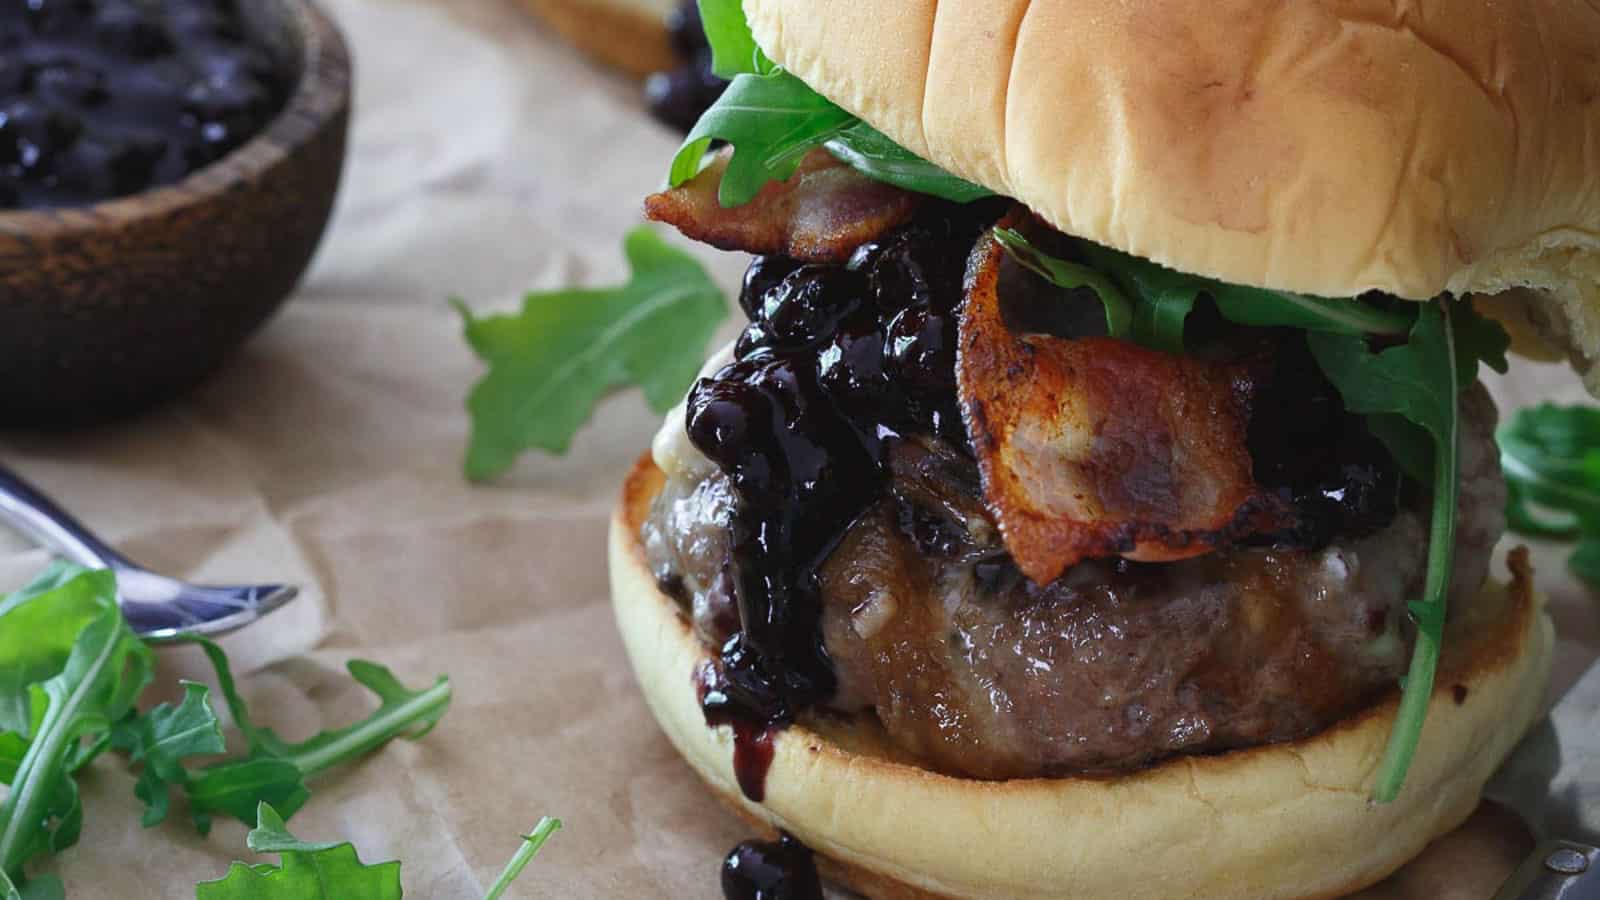 Blueberry BBQ brie burger with arugula.